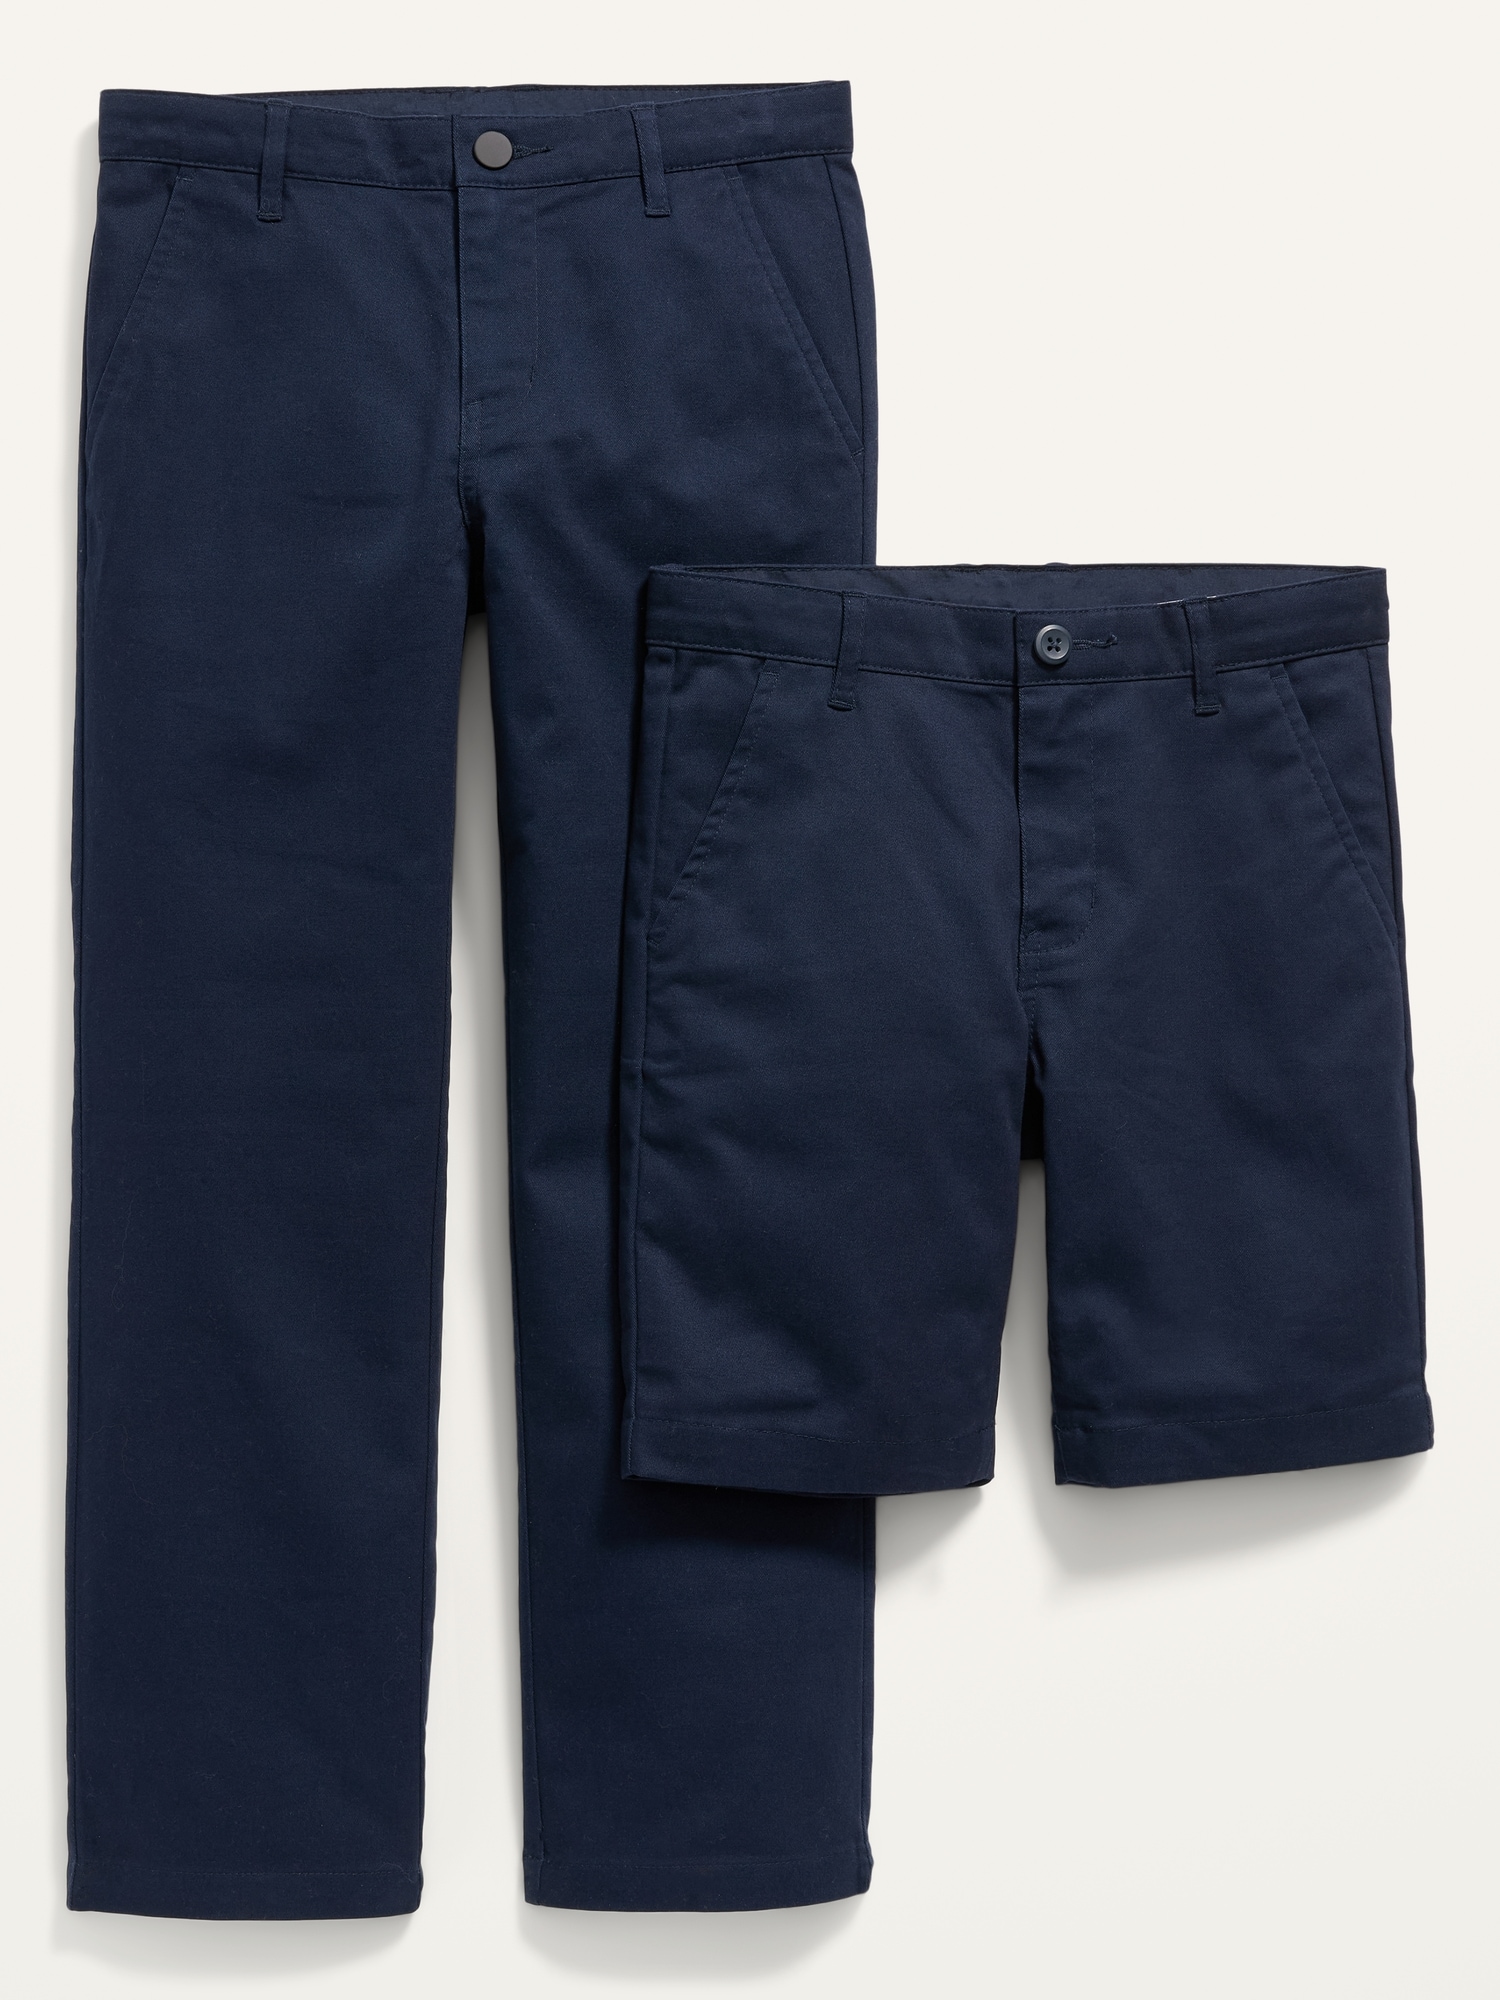 Old Navy Straight Uniform Pants & Shorts (At Knee) 2-Pack for Boys blue. 1